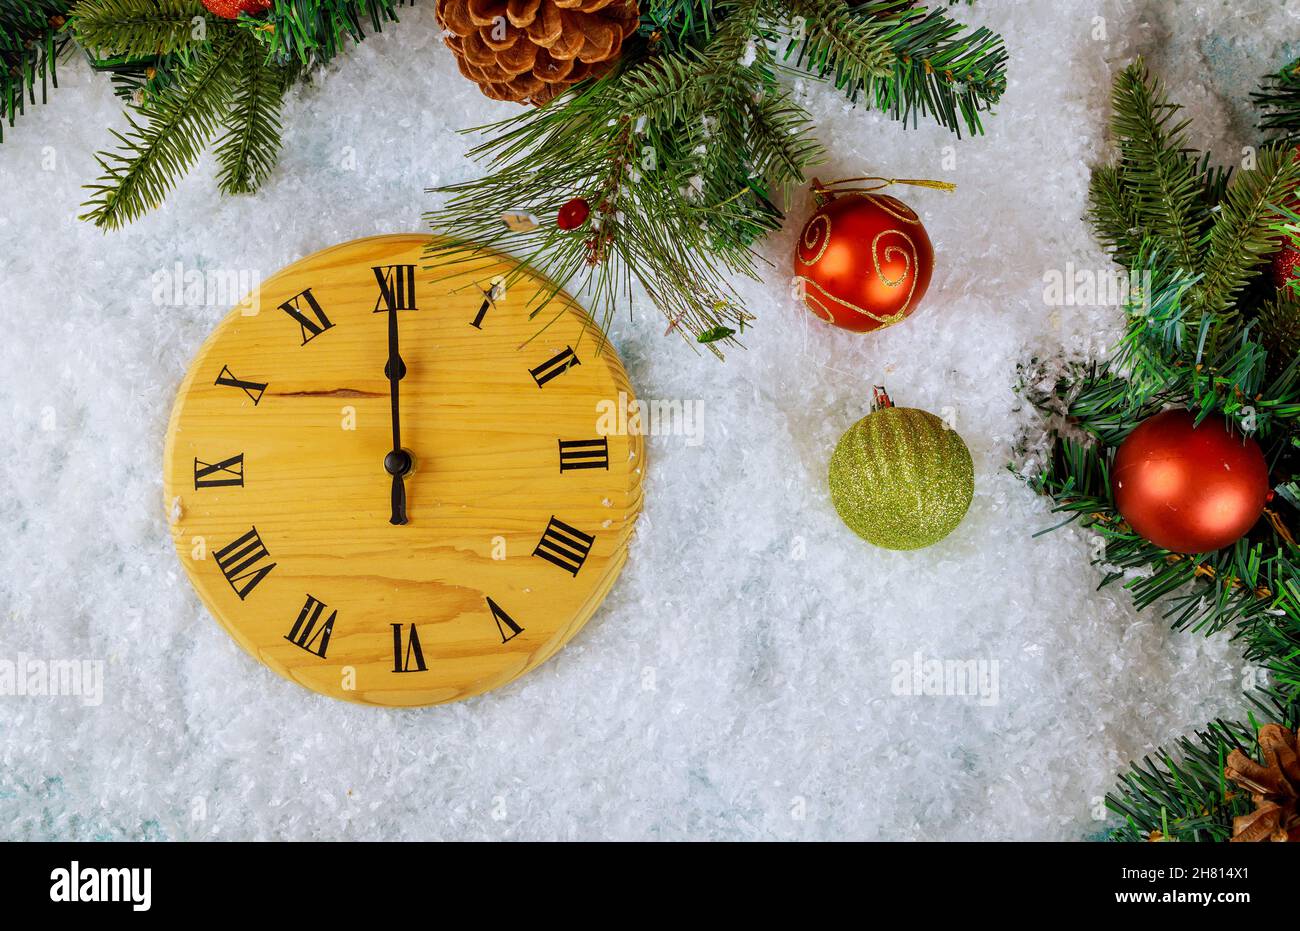 Christmas decorations tree with snow retro style clock to midnight Happy New Year Stock Photo